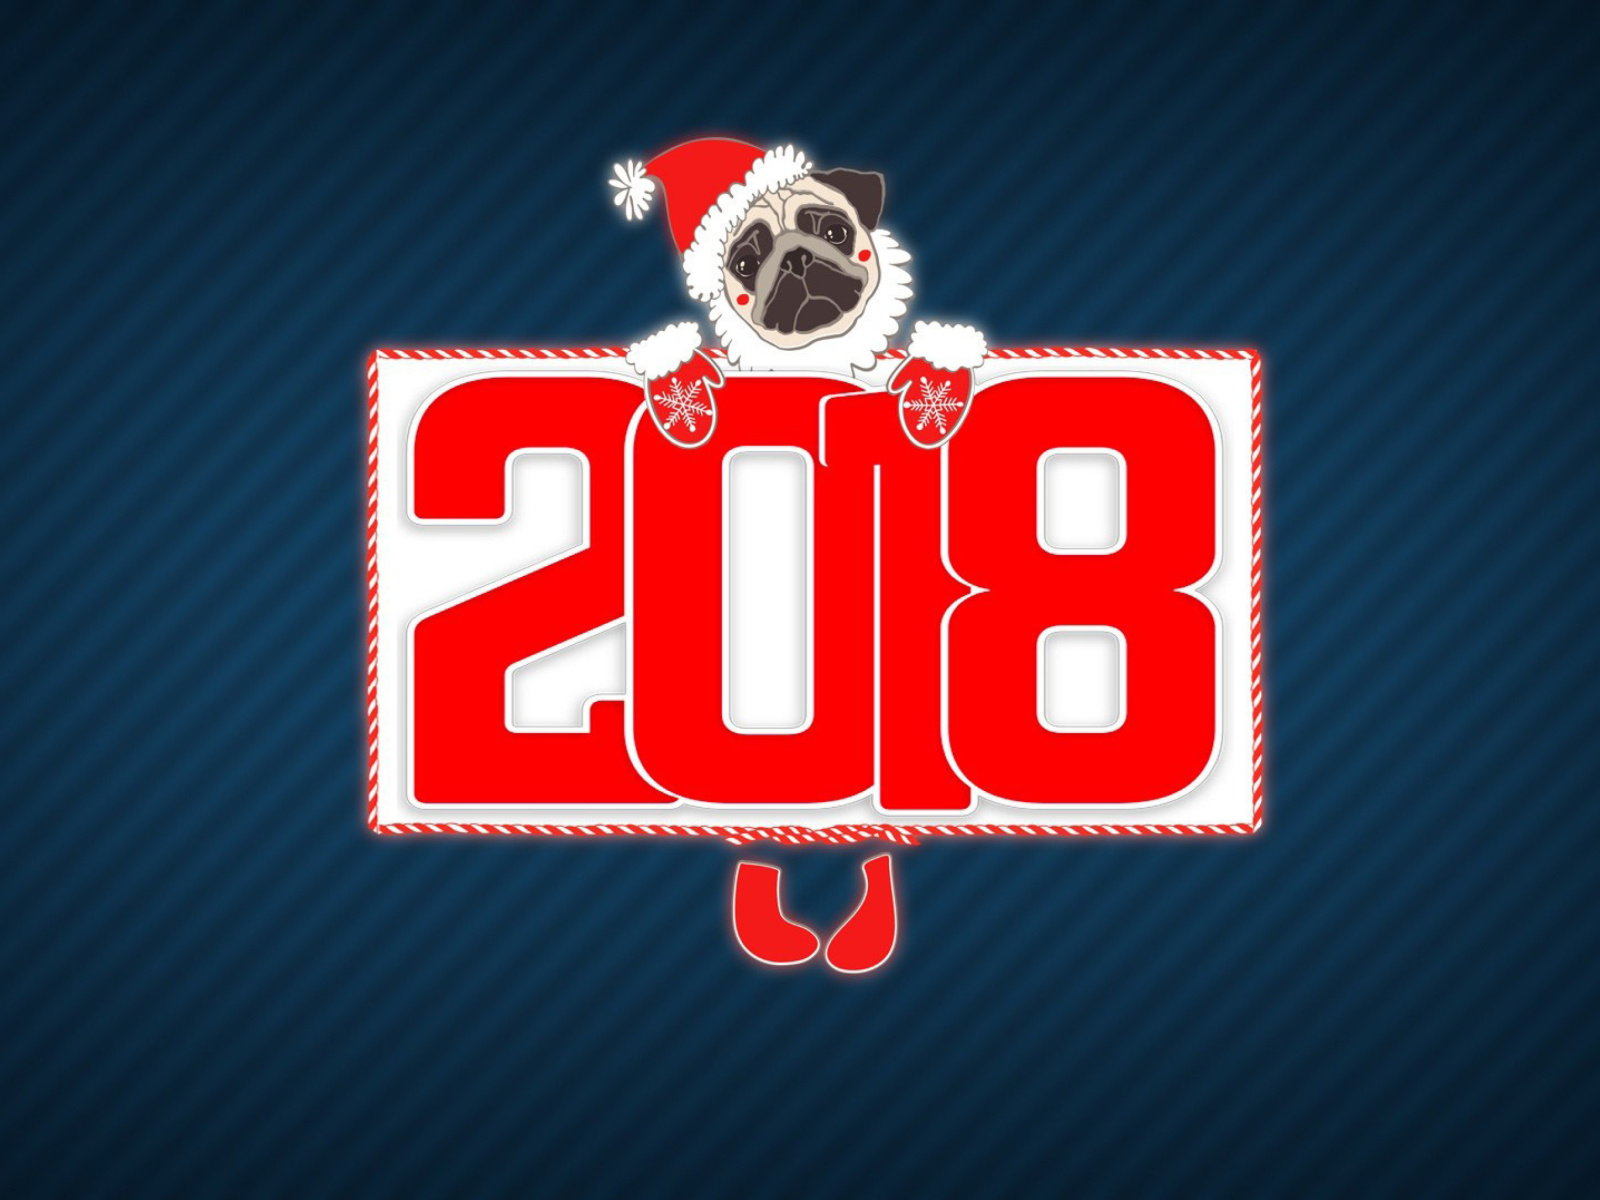 2018 New Year Chinese horoscope year of the Dog wallpaper 1600x1200